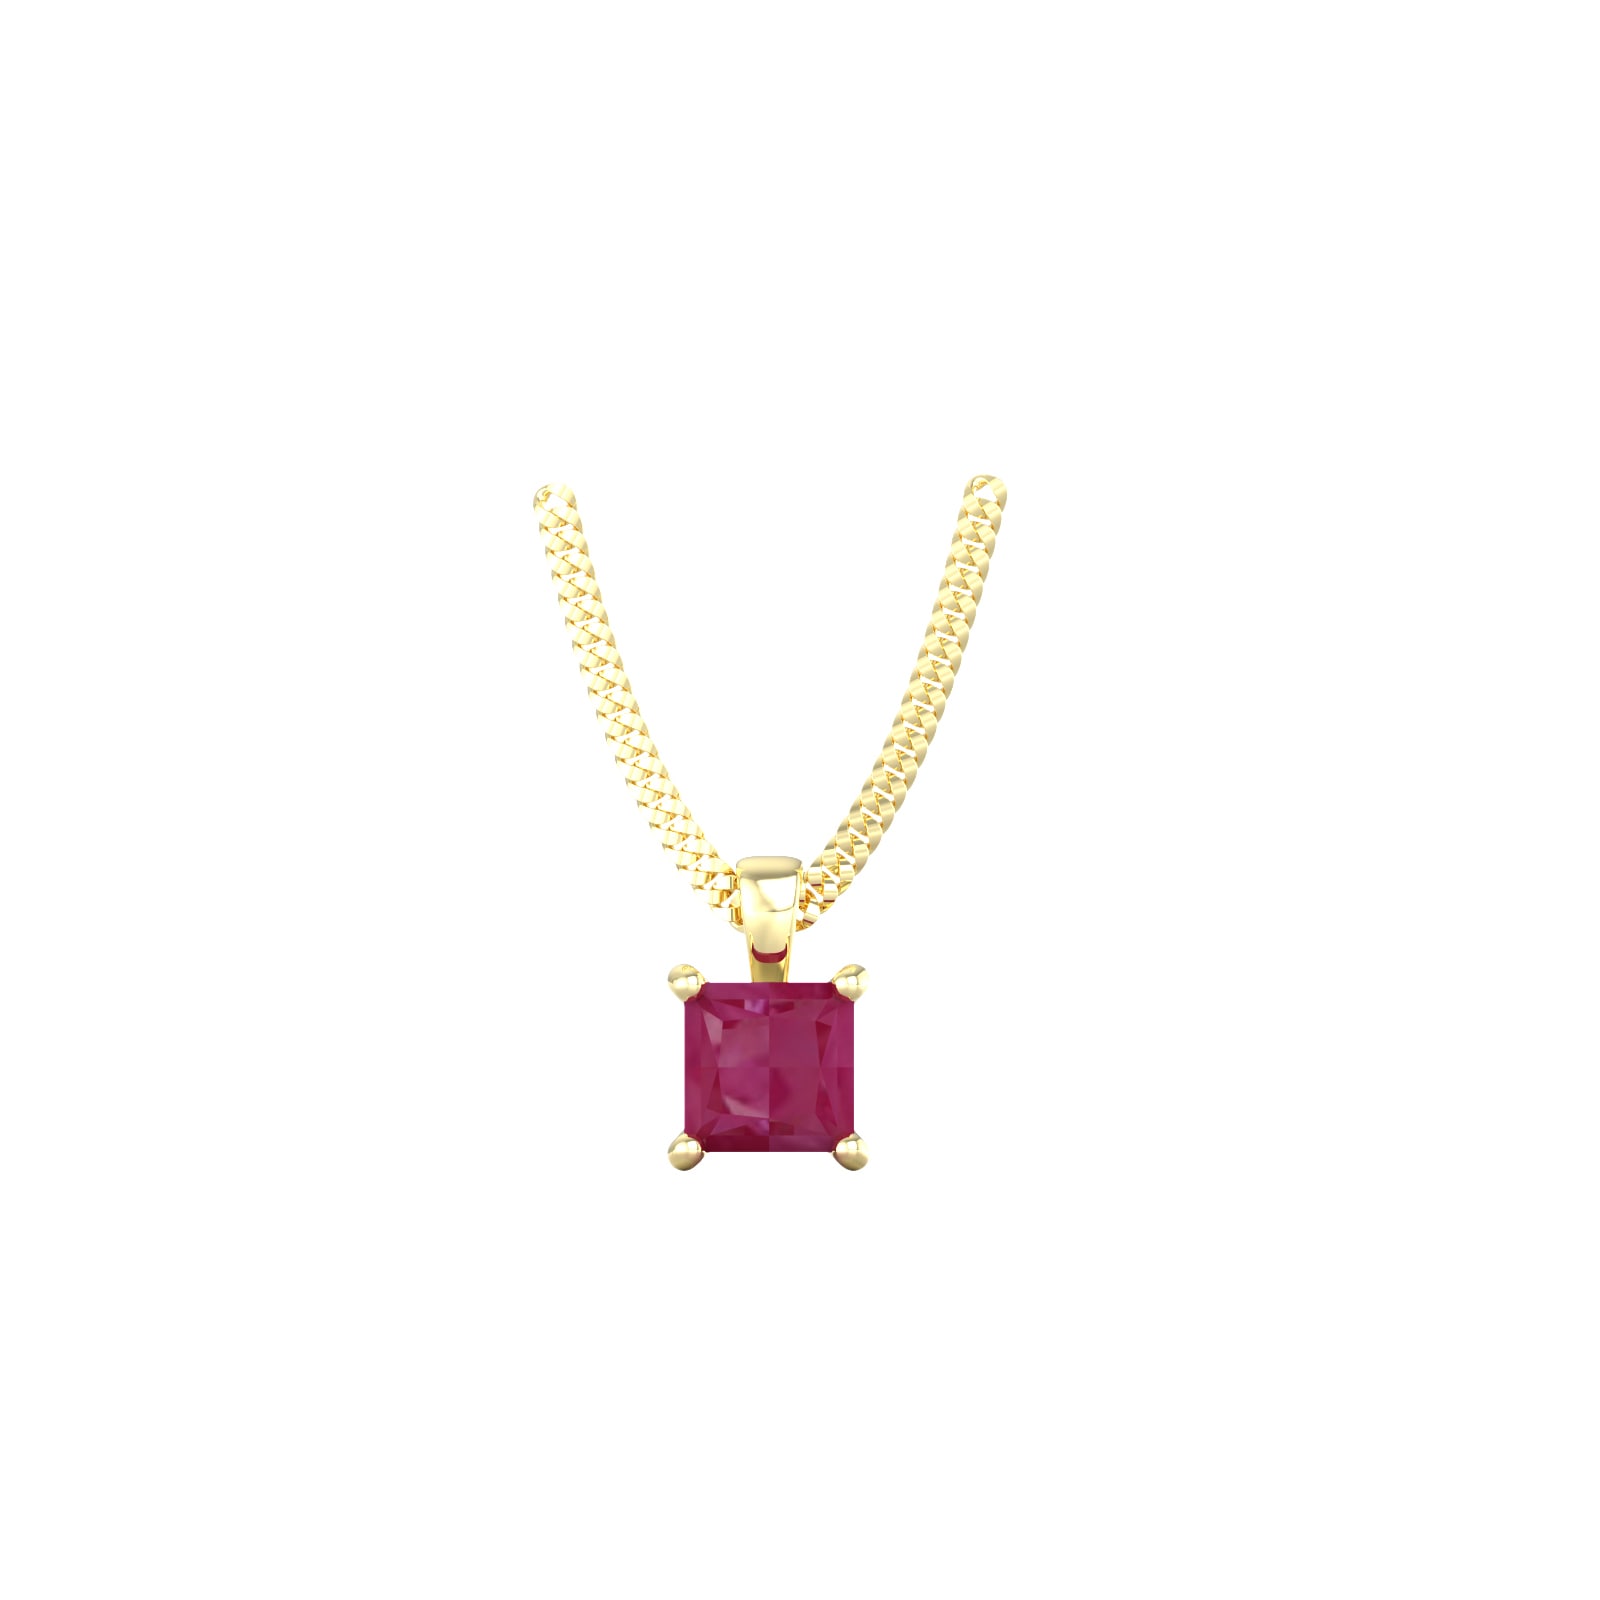 9ct Yellow Gold 4 Claw Square Ruby 5mm x 5mm Pendant & Chain